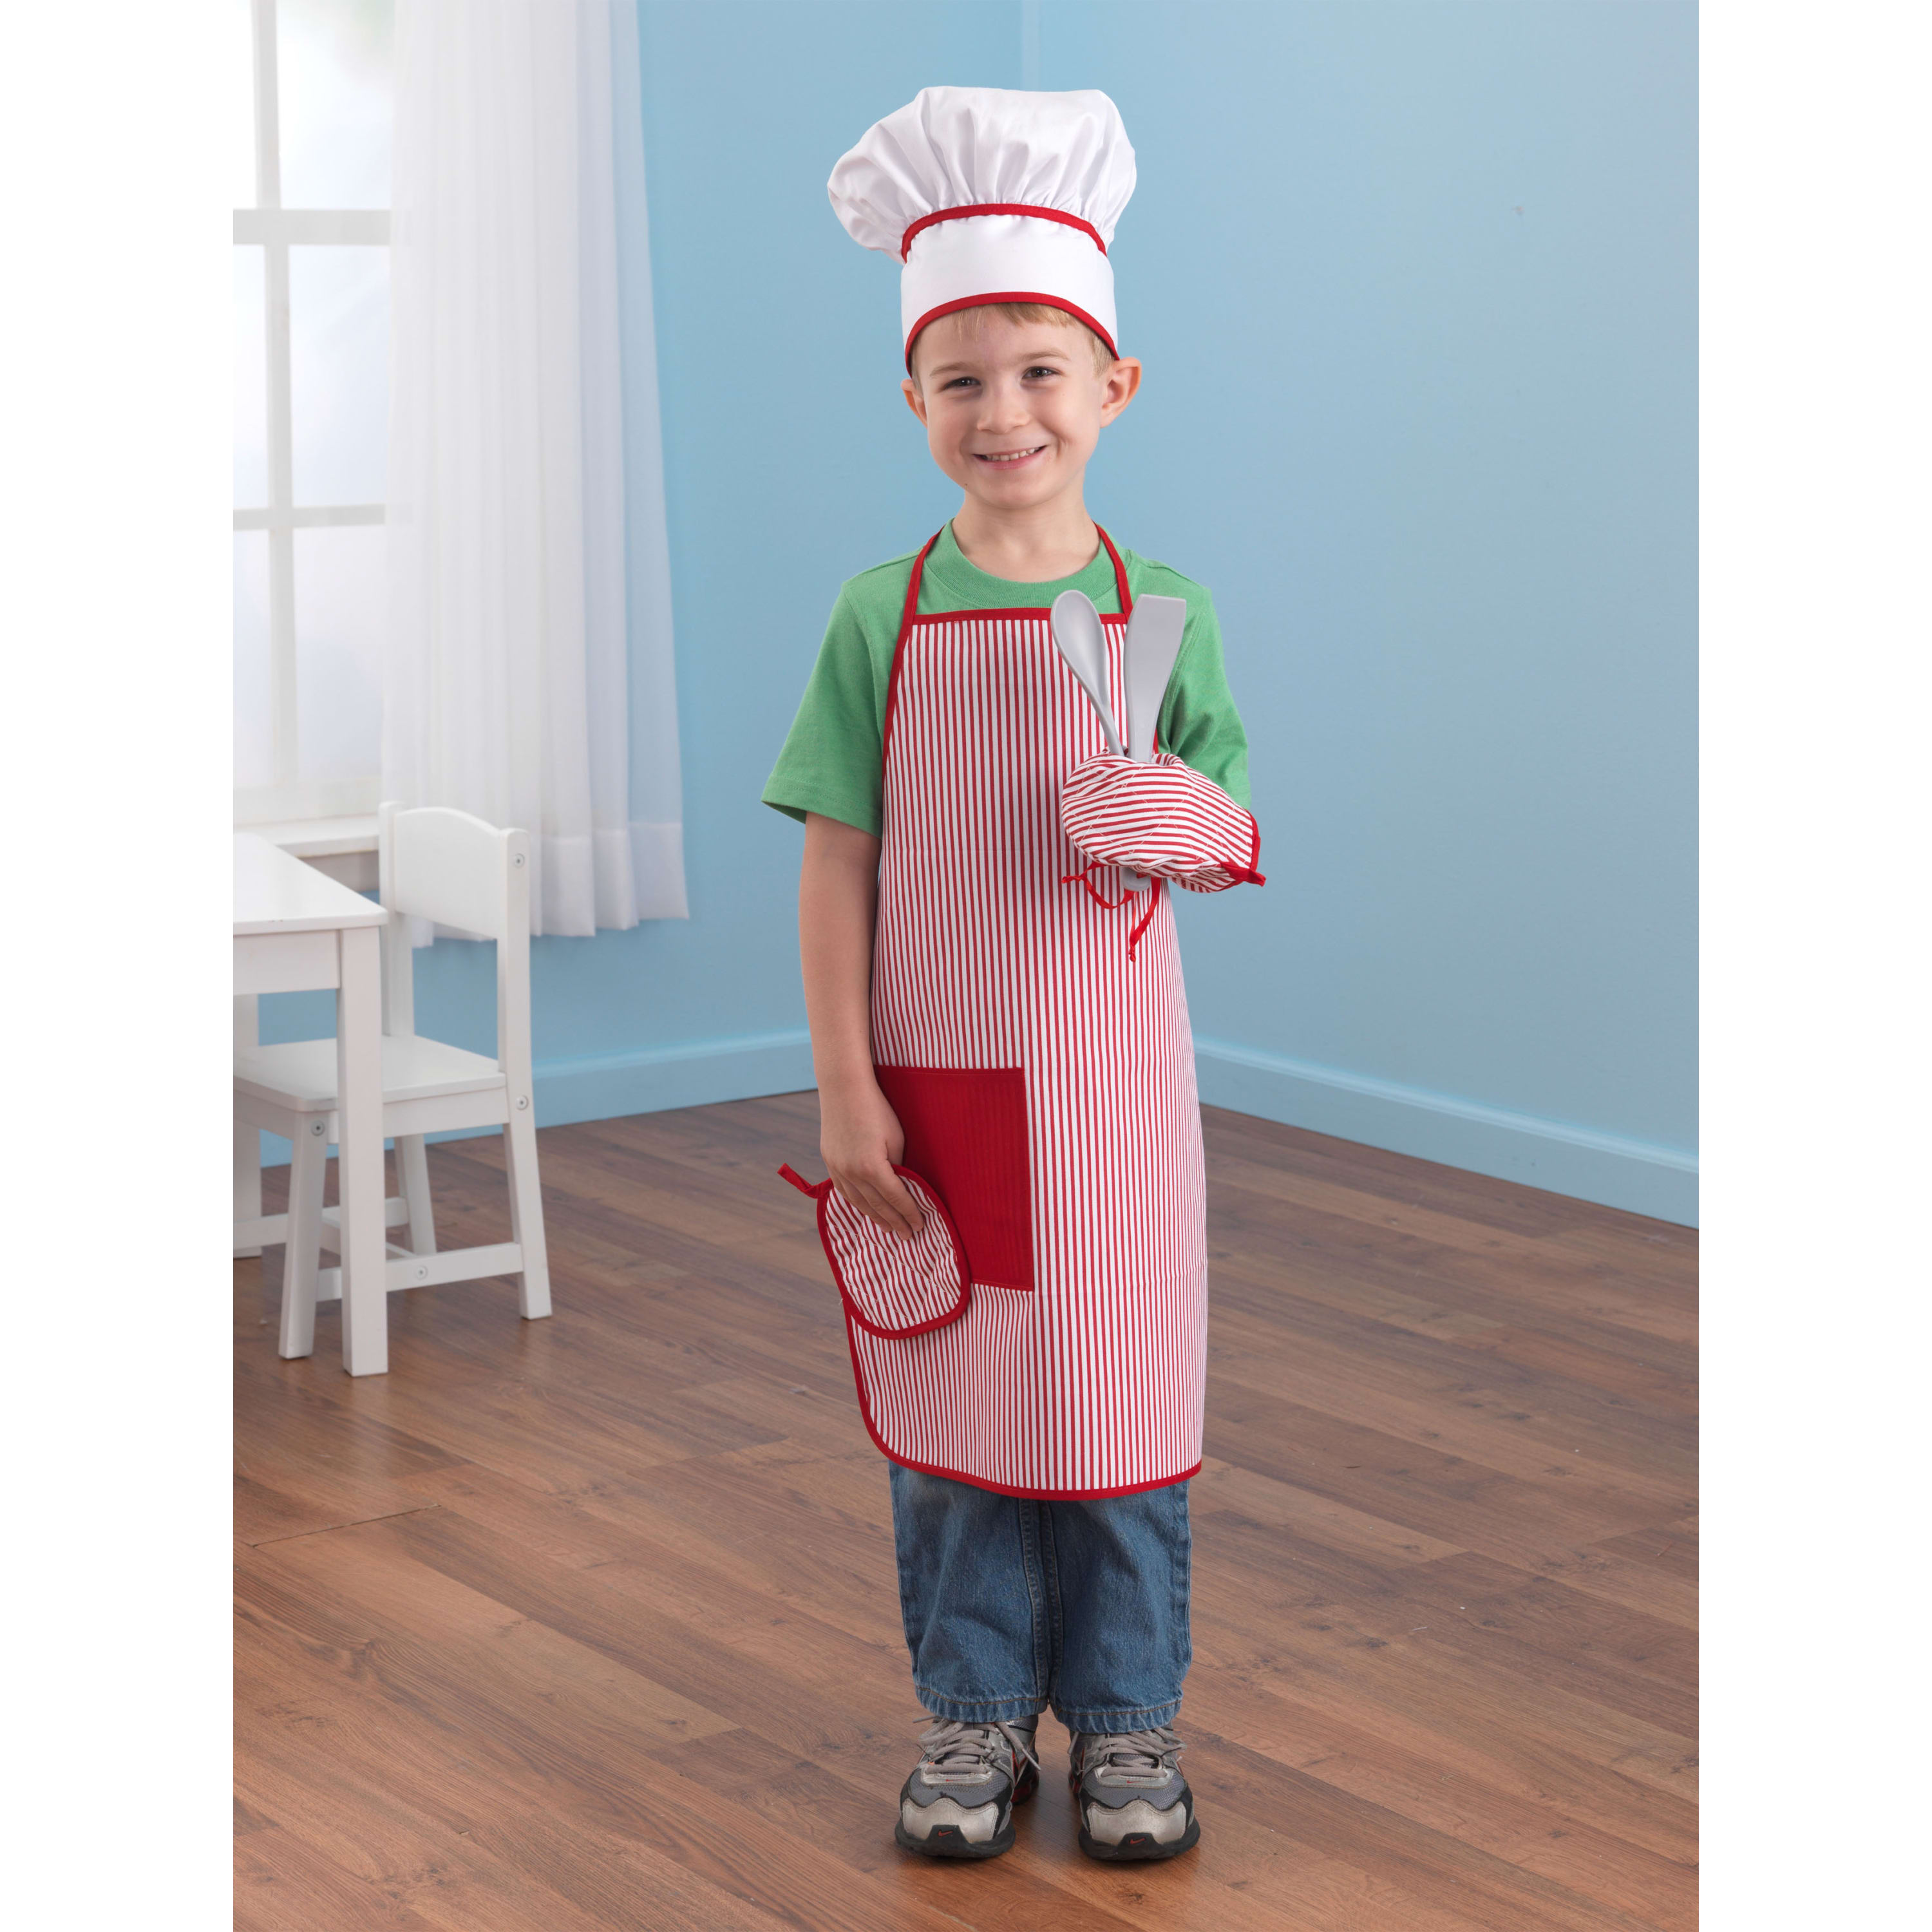 KidKraft Tasty Treats Chef Apron, Hat and Accessory Set for Kids - Red - image 2 of 4